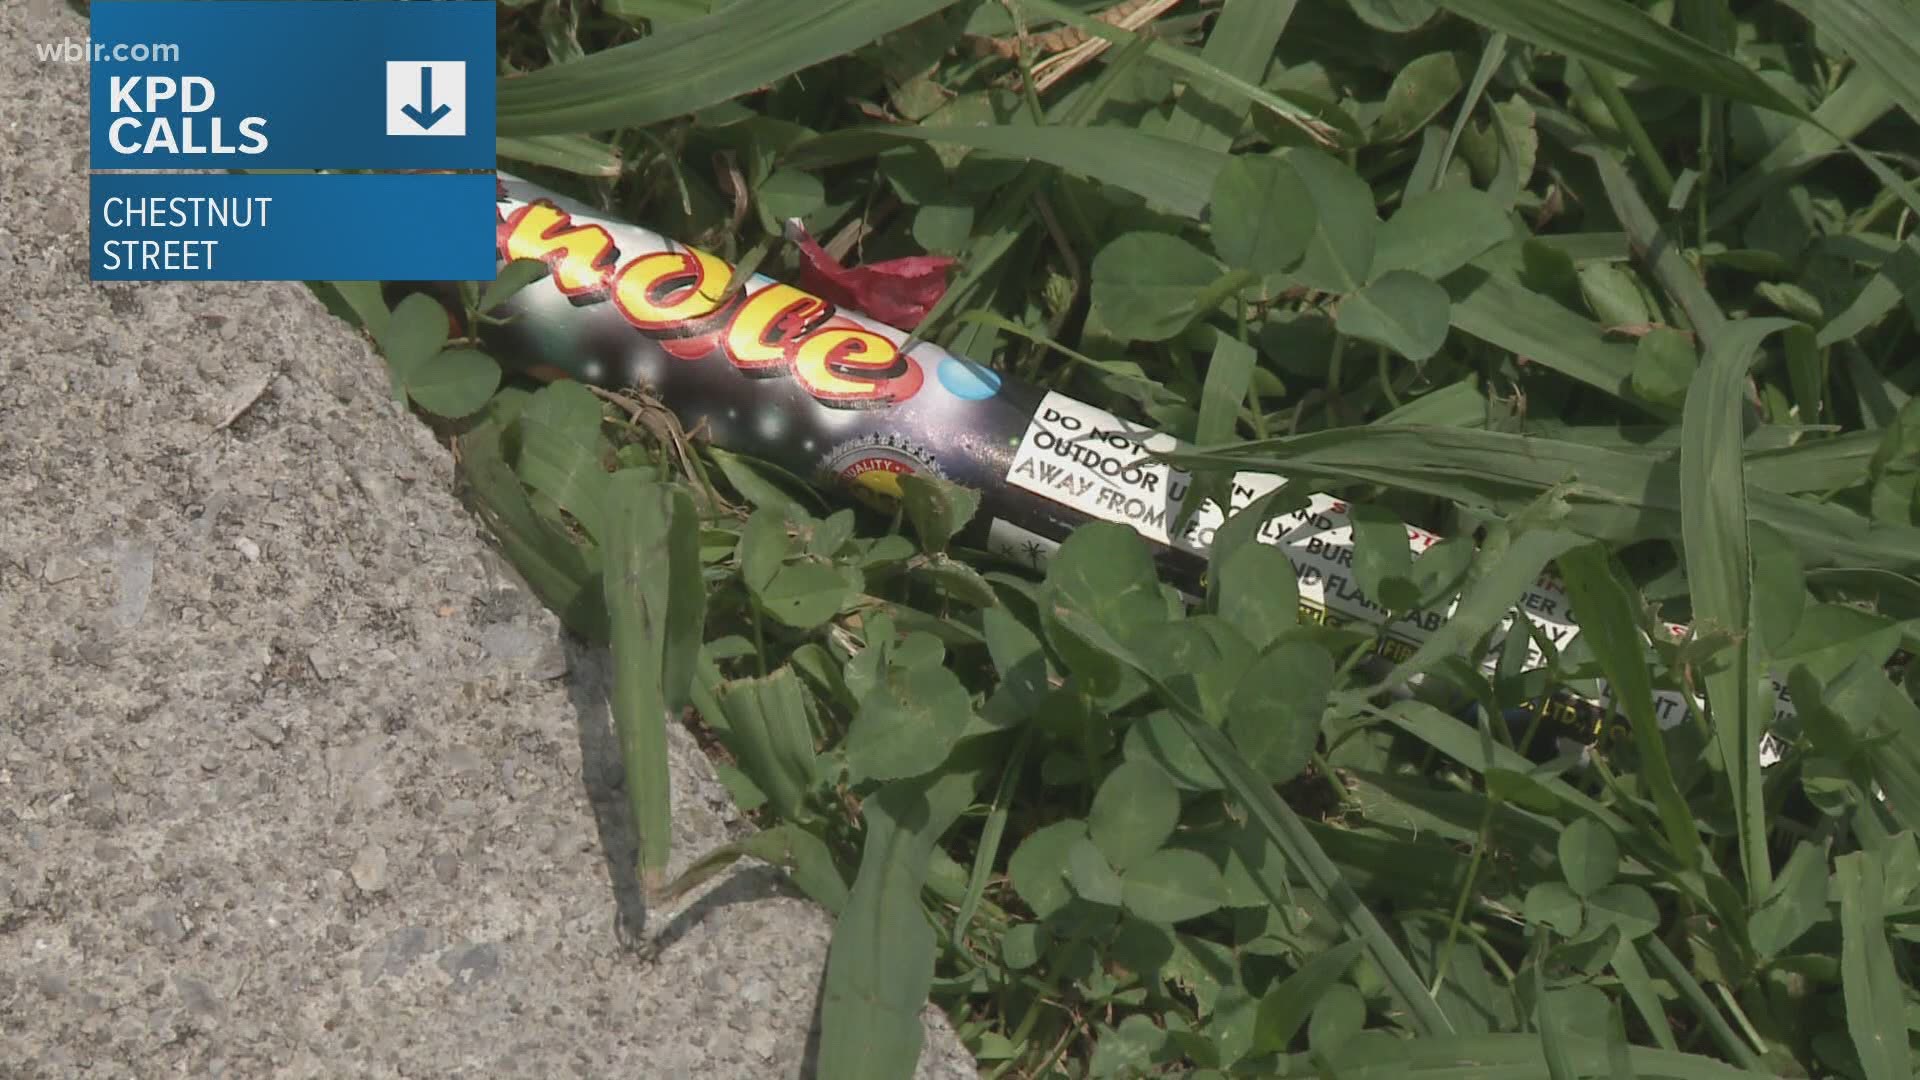 Knoxville authorities are looking into several reports of illegal fireworks this holiday weekend.